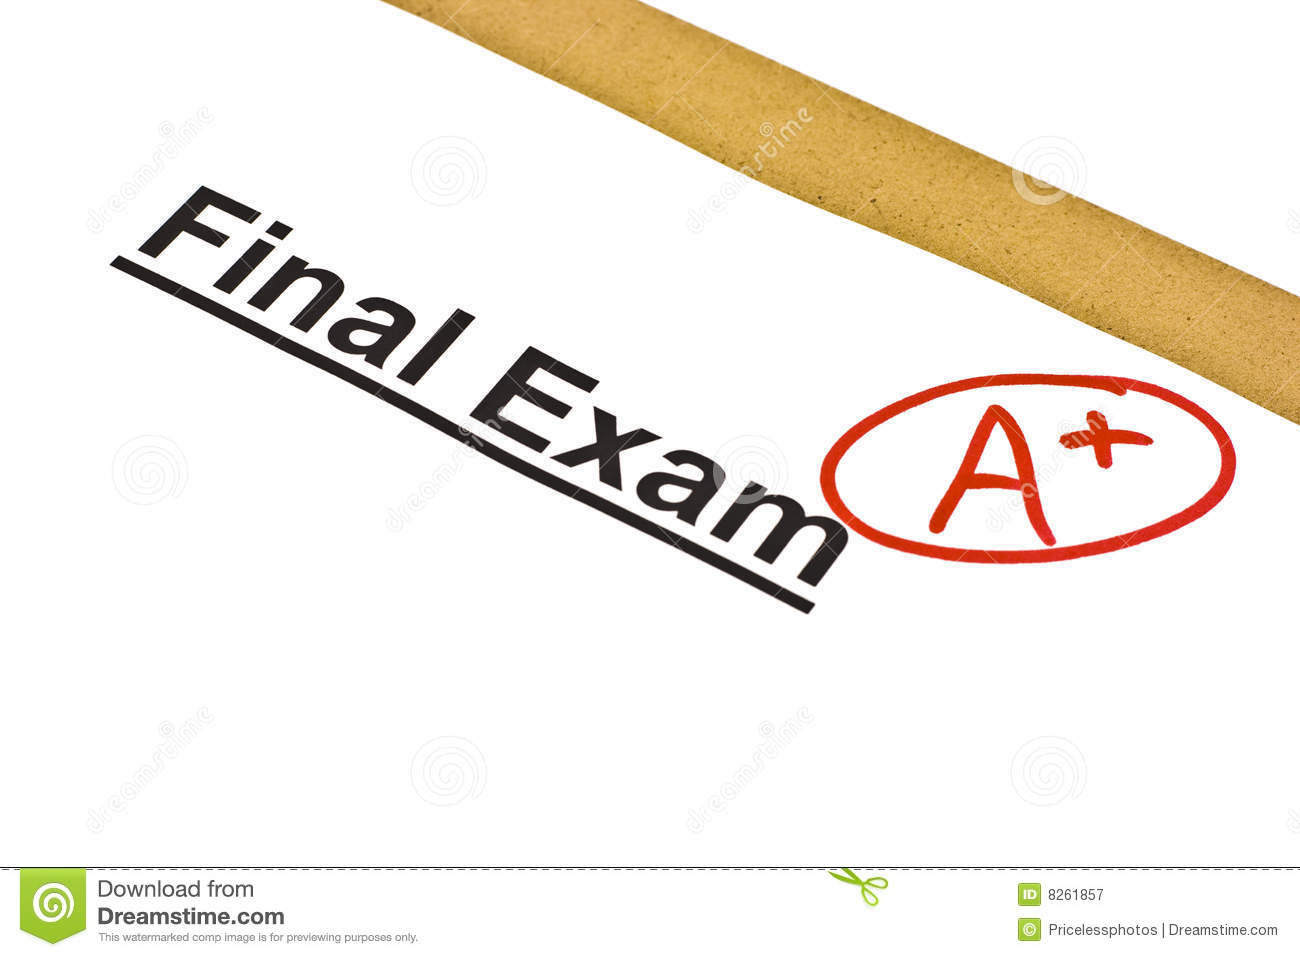 Final Exam Marked With A  Royalty Free Stock Photography   Image